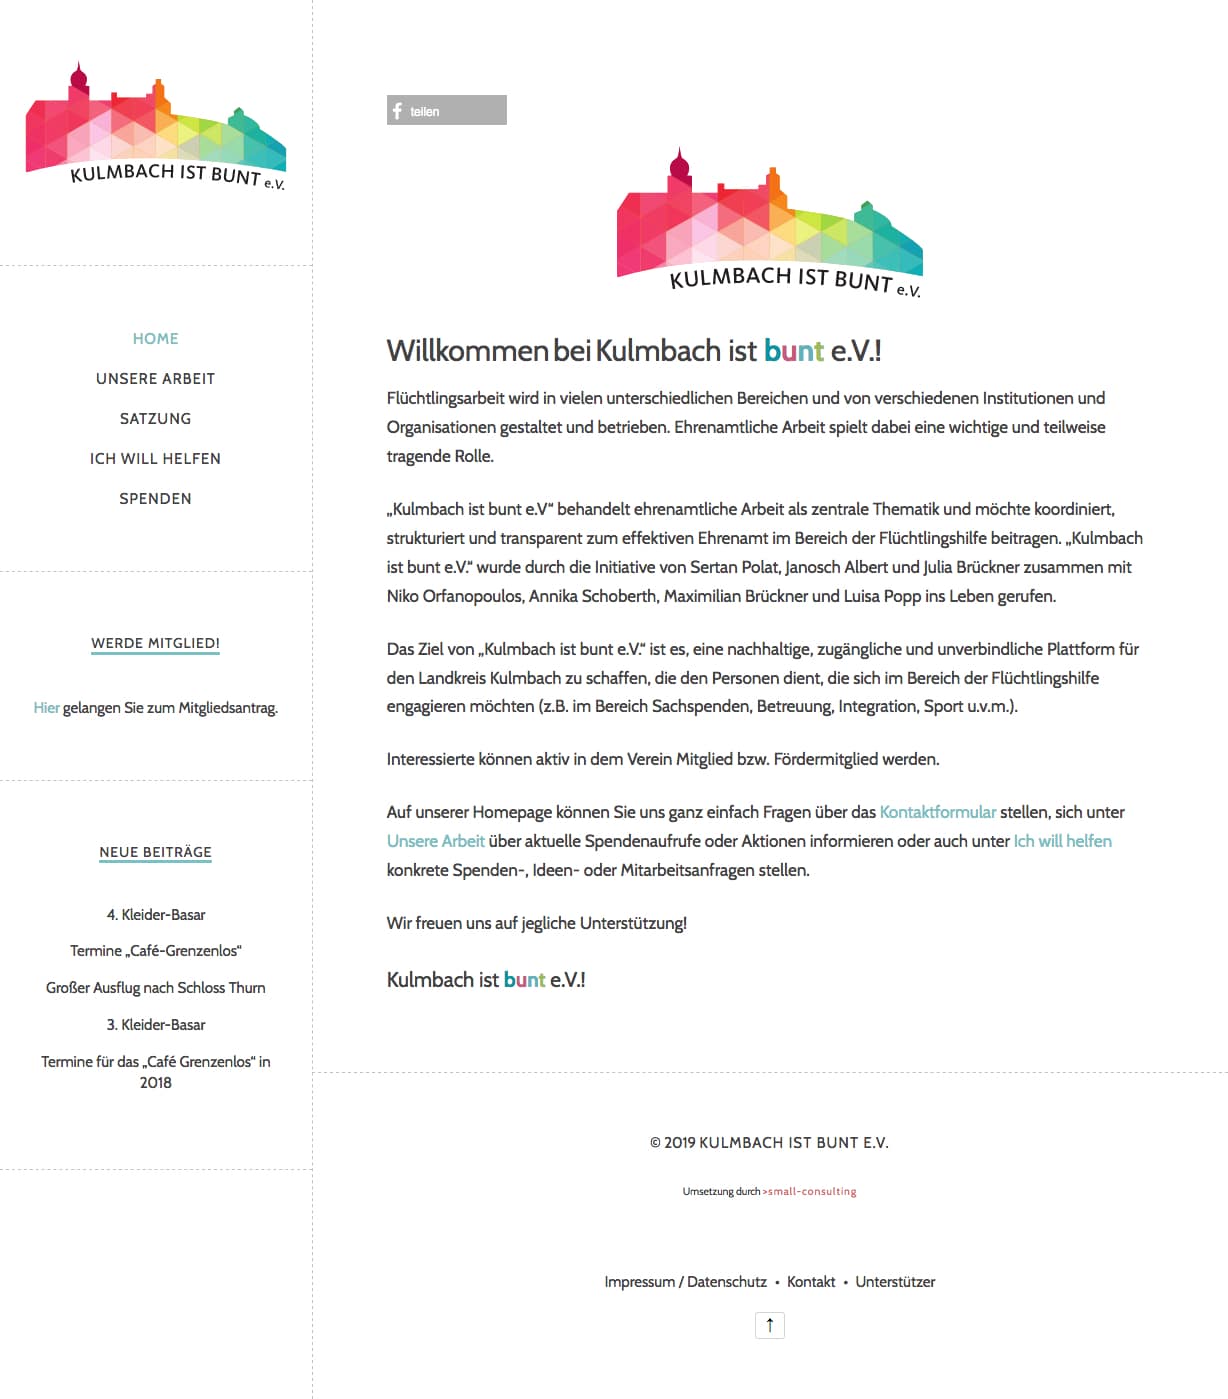 kulmbachistbunt_small-consulting